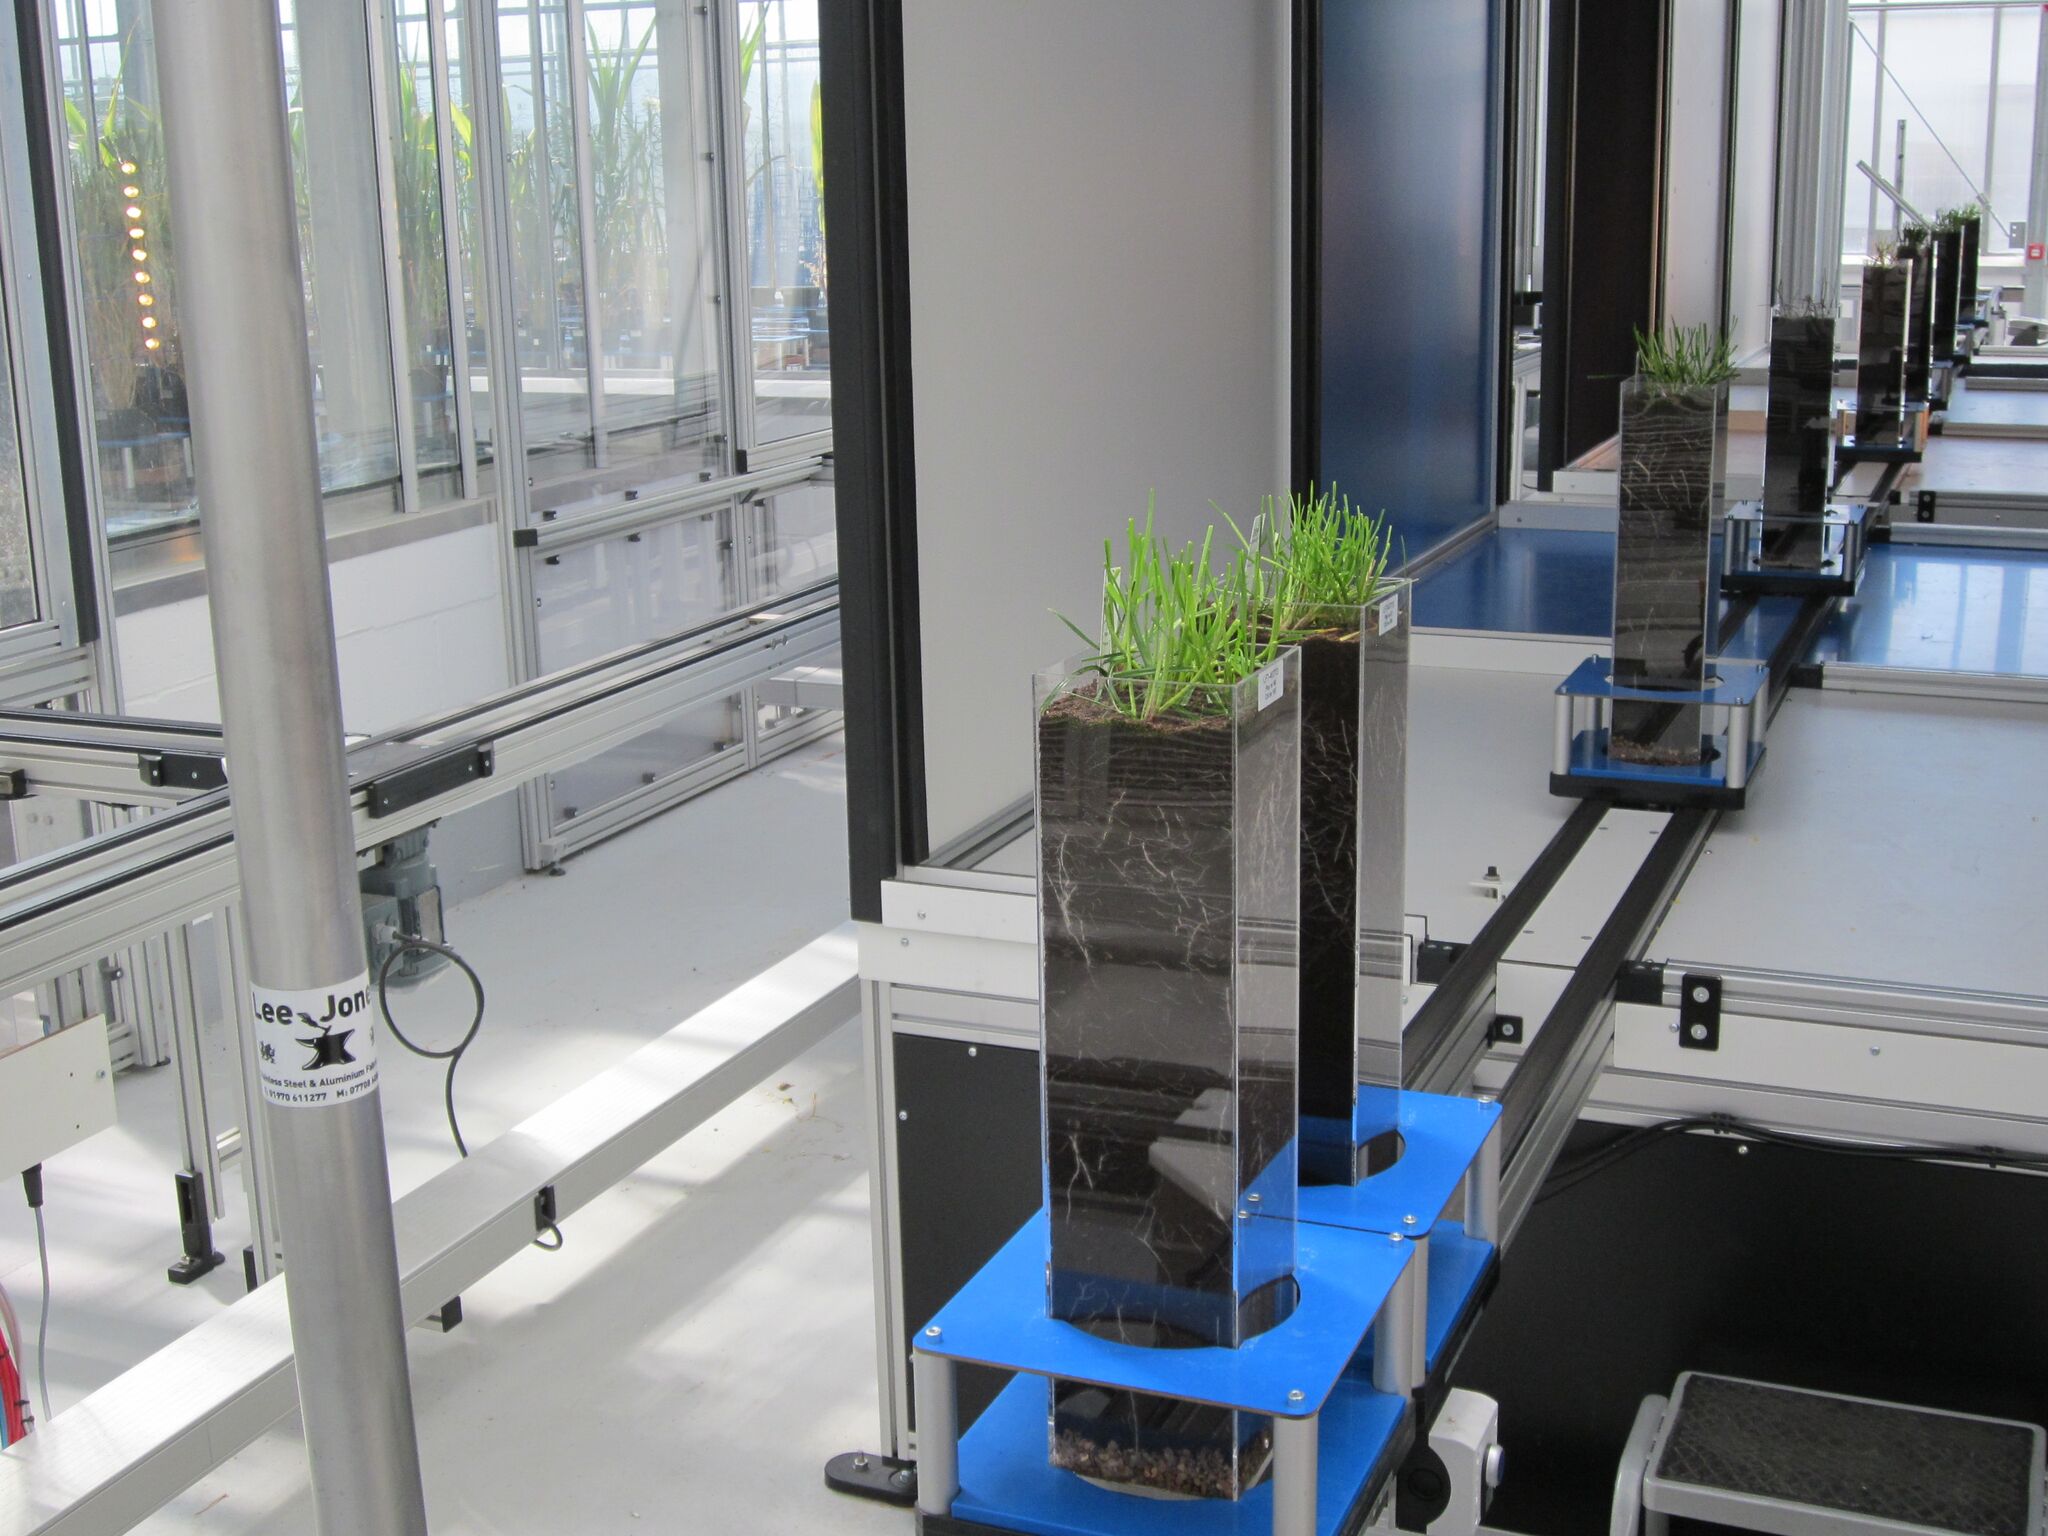 The National Plant Phenomics Centre at IBERS Aberystwyth University provides facilities that allow root structures to be examined in living plants